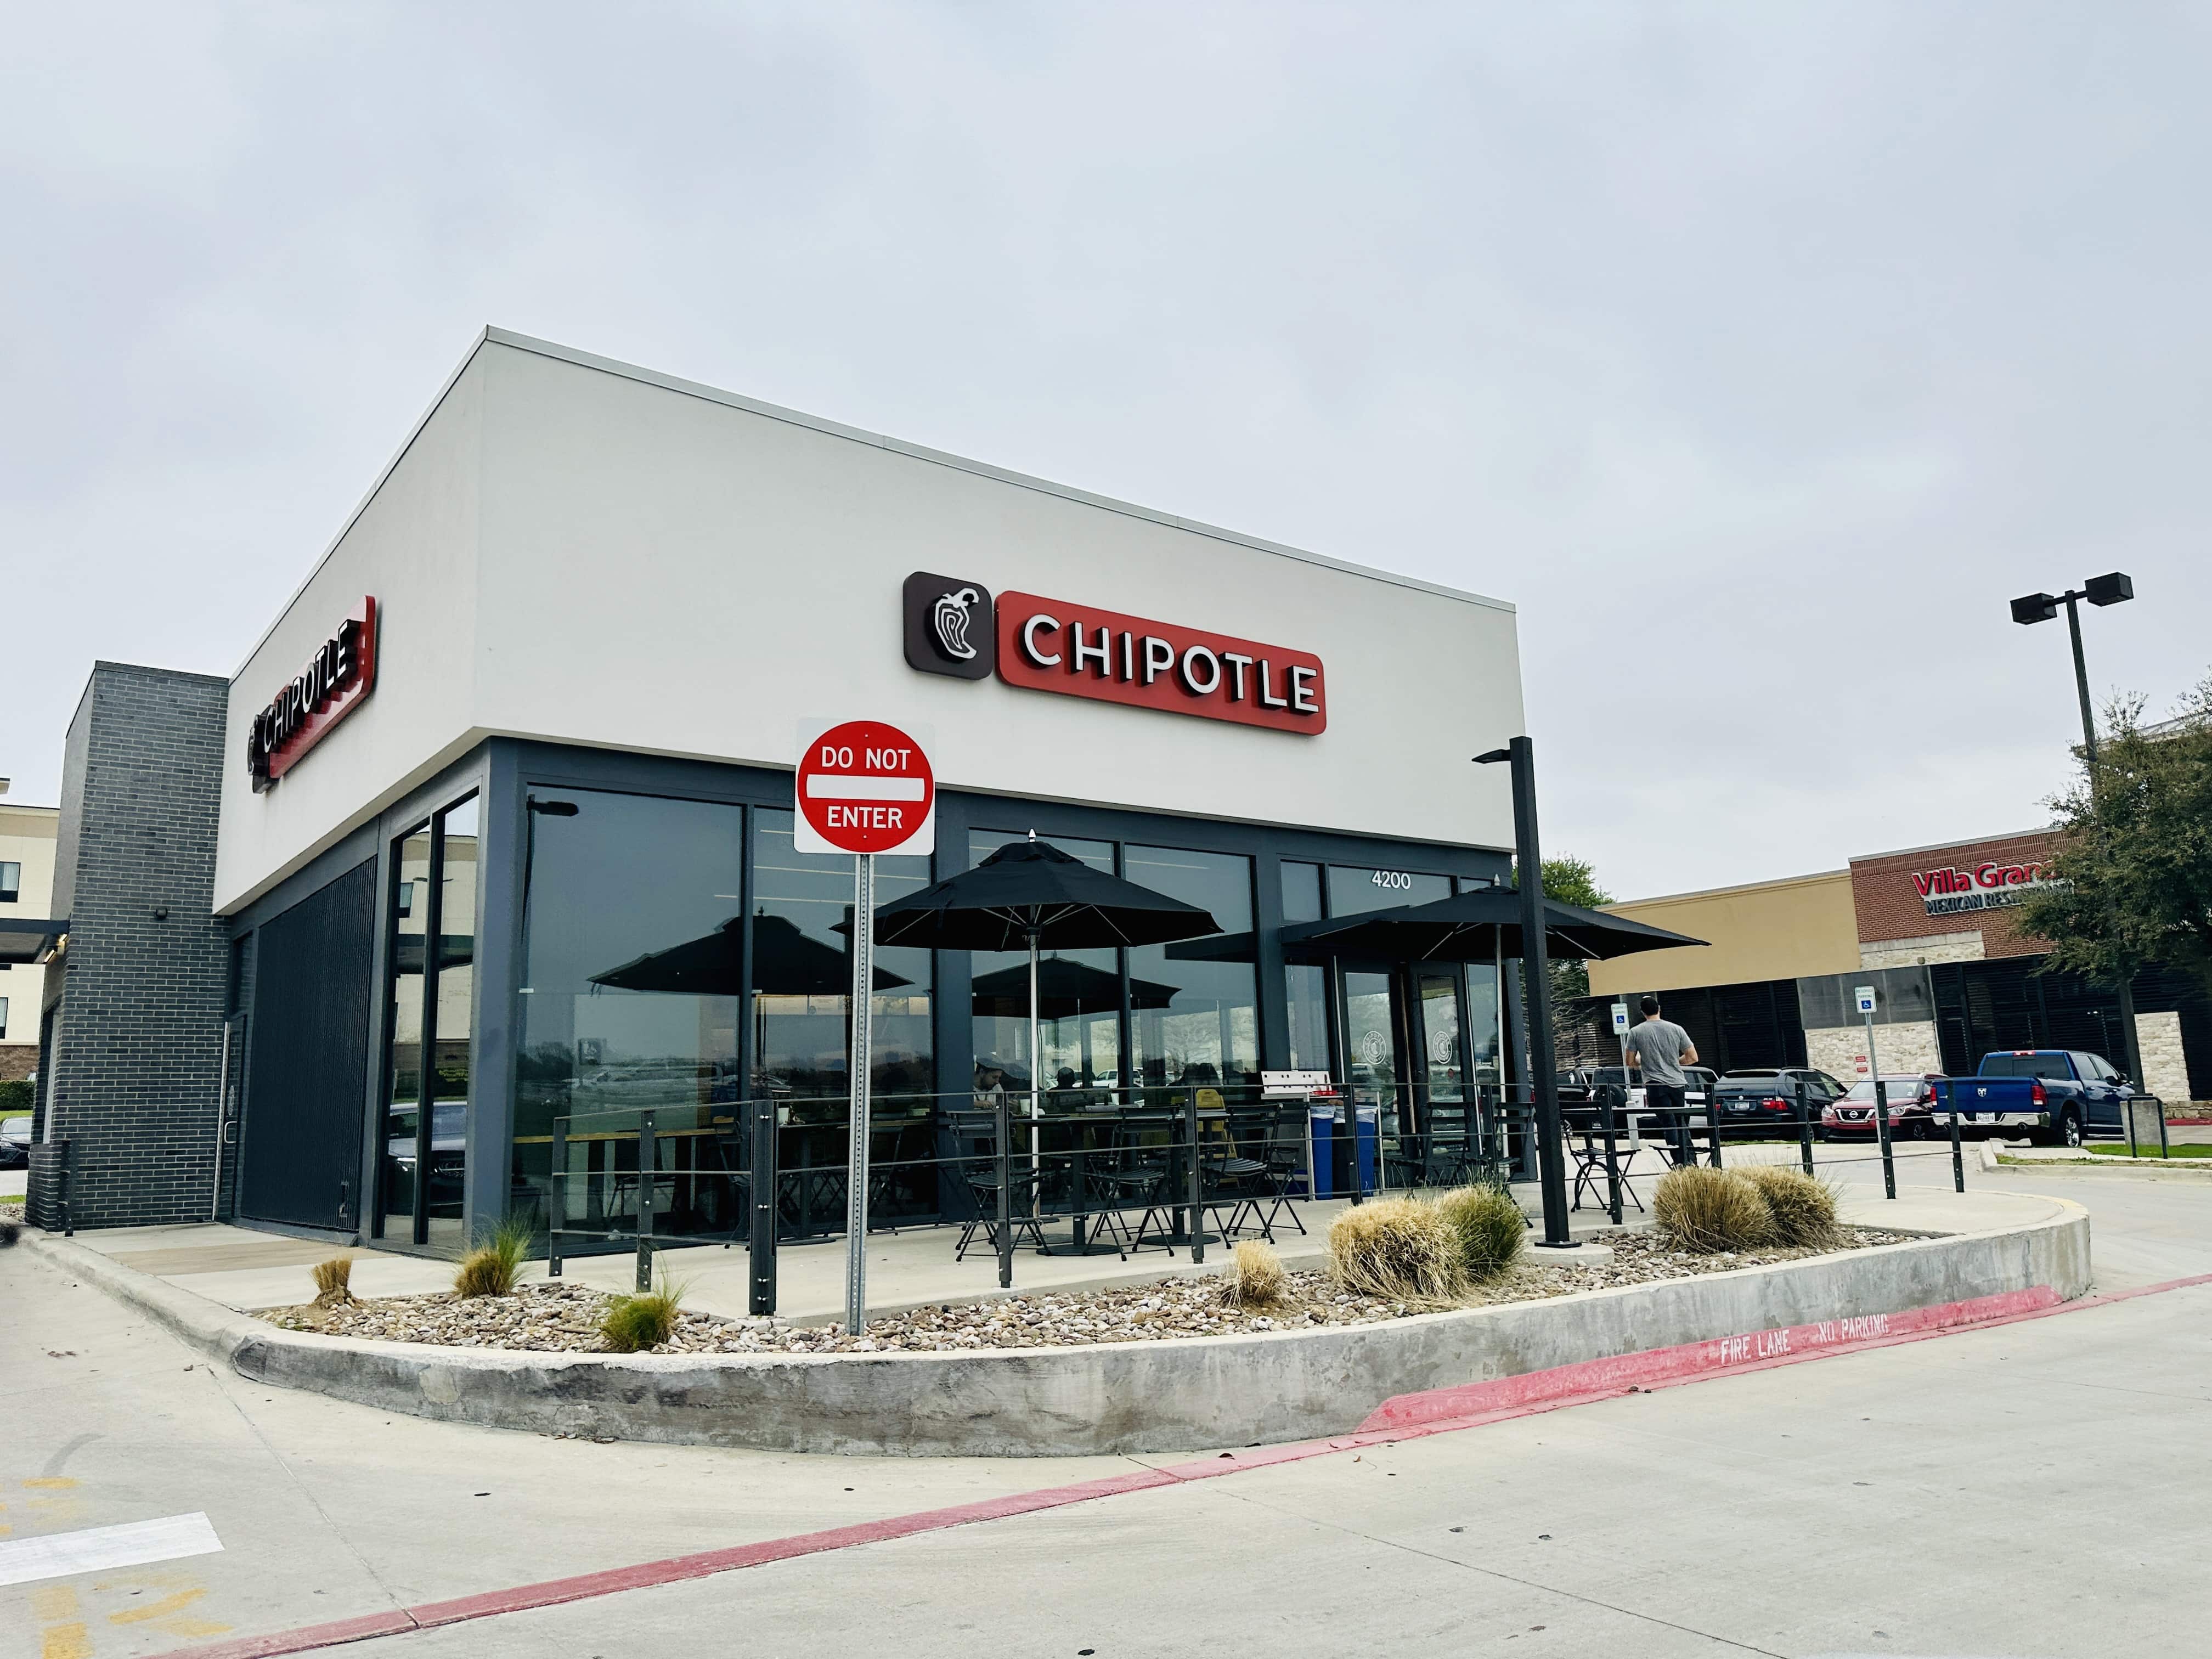 Chipotle Mexican Grill - Fort Worth (TX 76155), US, restaurants by me